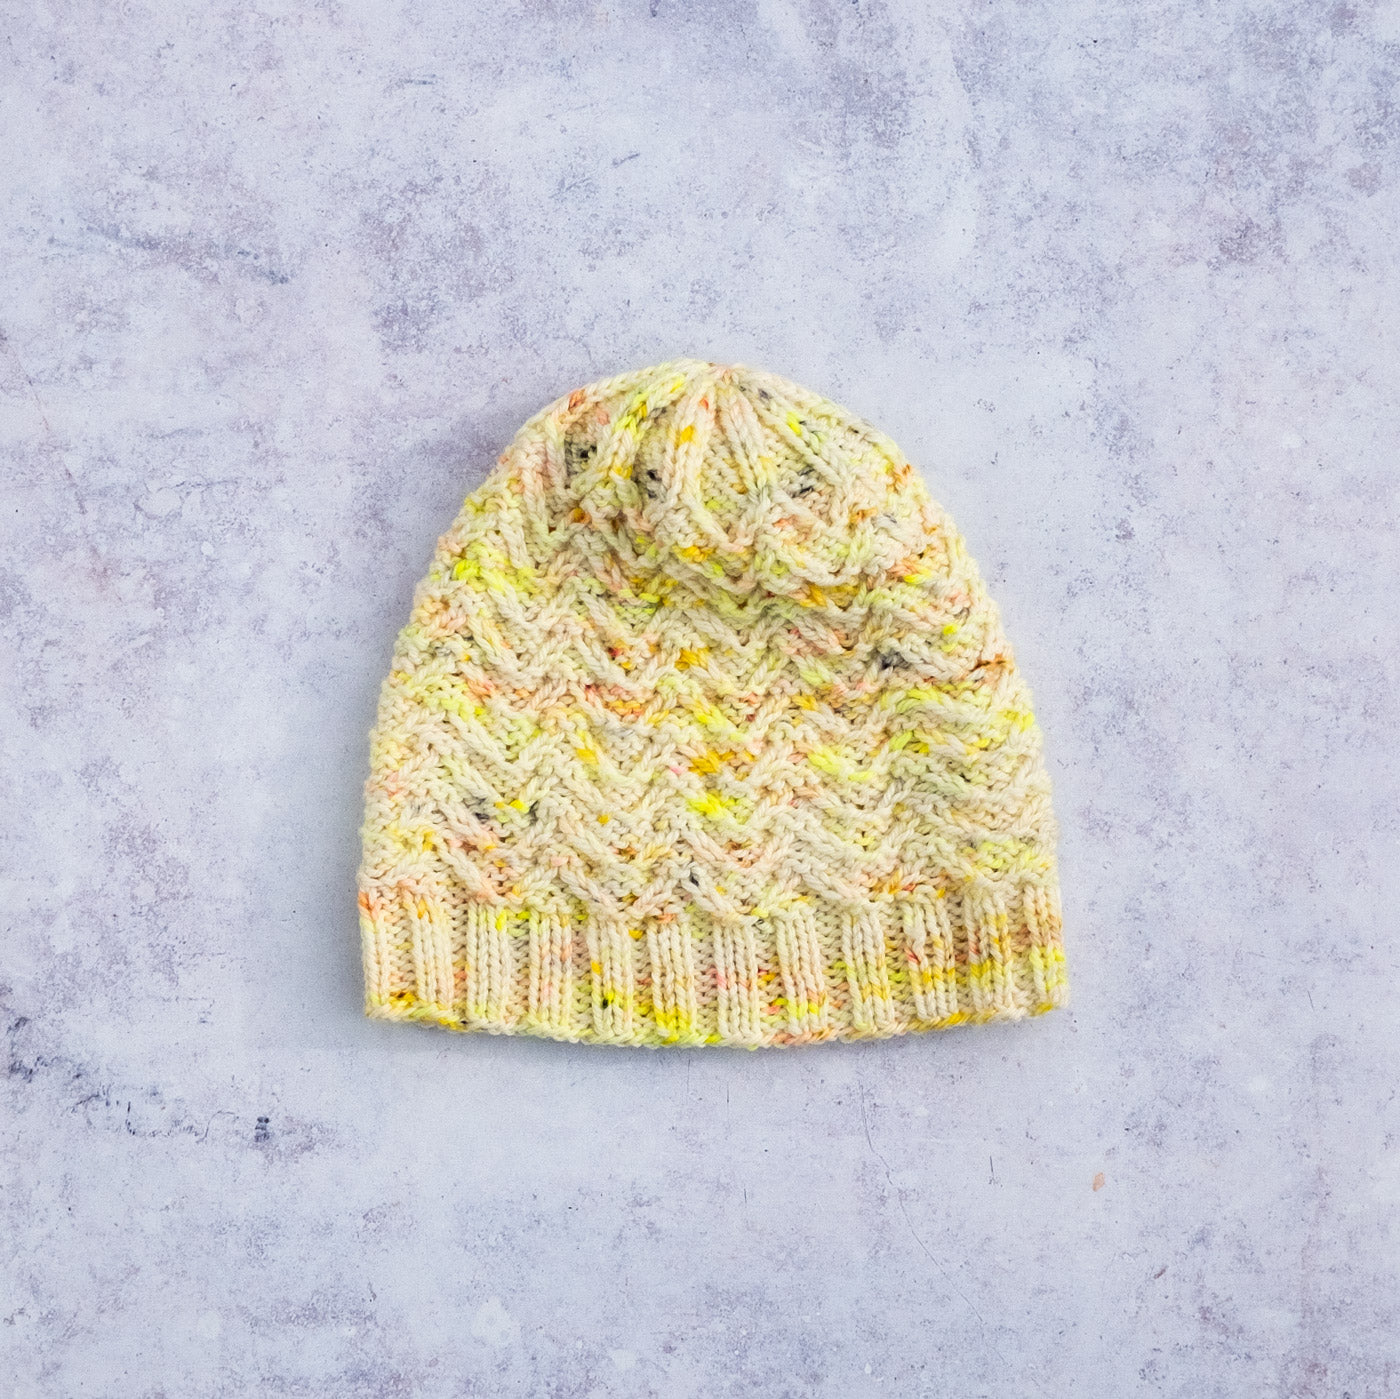 Handknit hat laying flat, it has textured stitches in white yarn speckled with neon yellow, gold and flecks of coral here and there. The crown of the hat has in interesting decreasing pattern, the texture of the stitches come together a little like a flower motif.